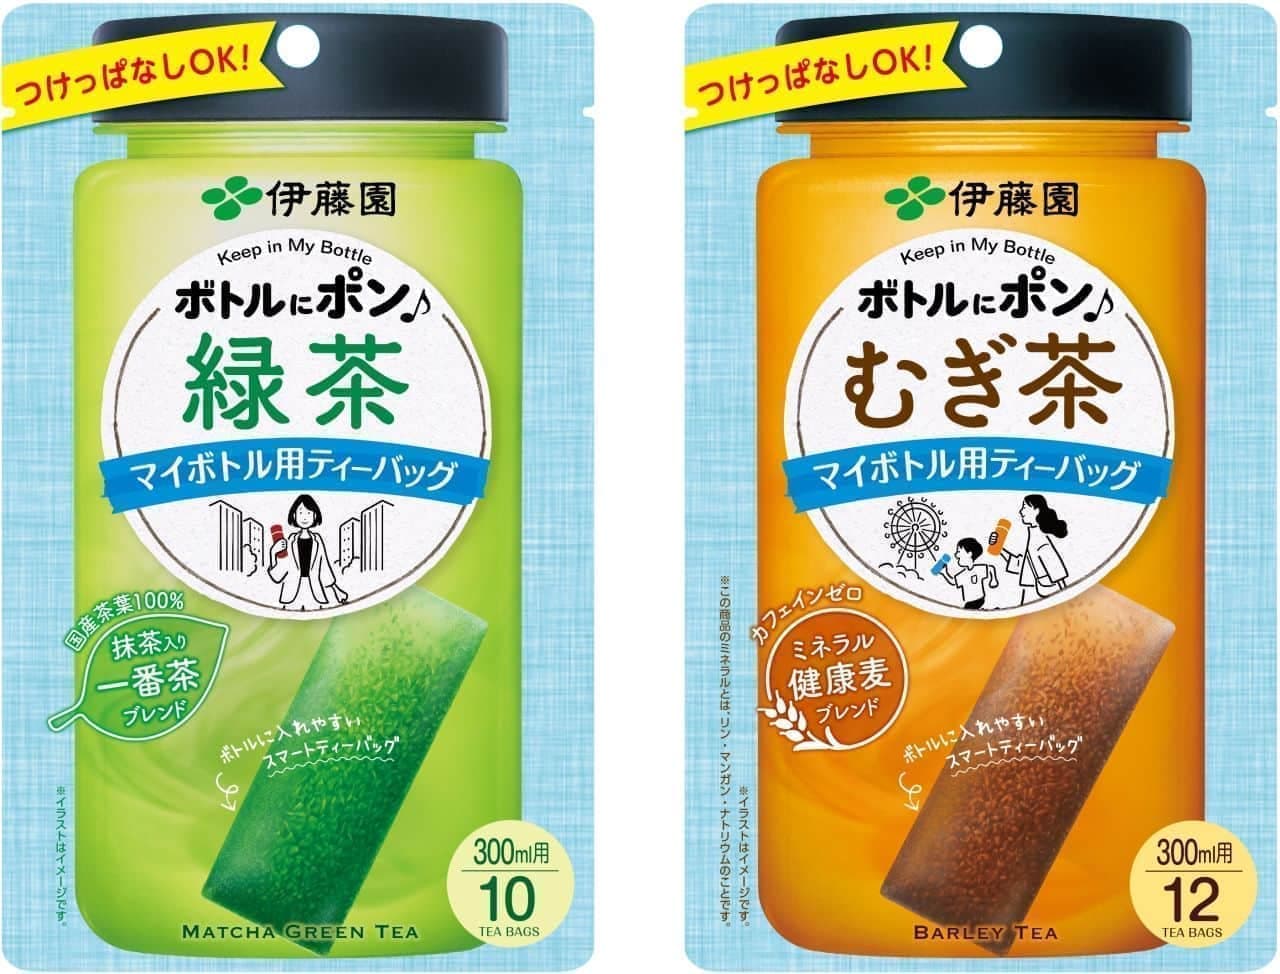 Tea bag "Pon in a bottle" that does not become bitter even if left on